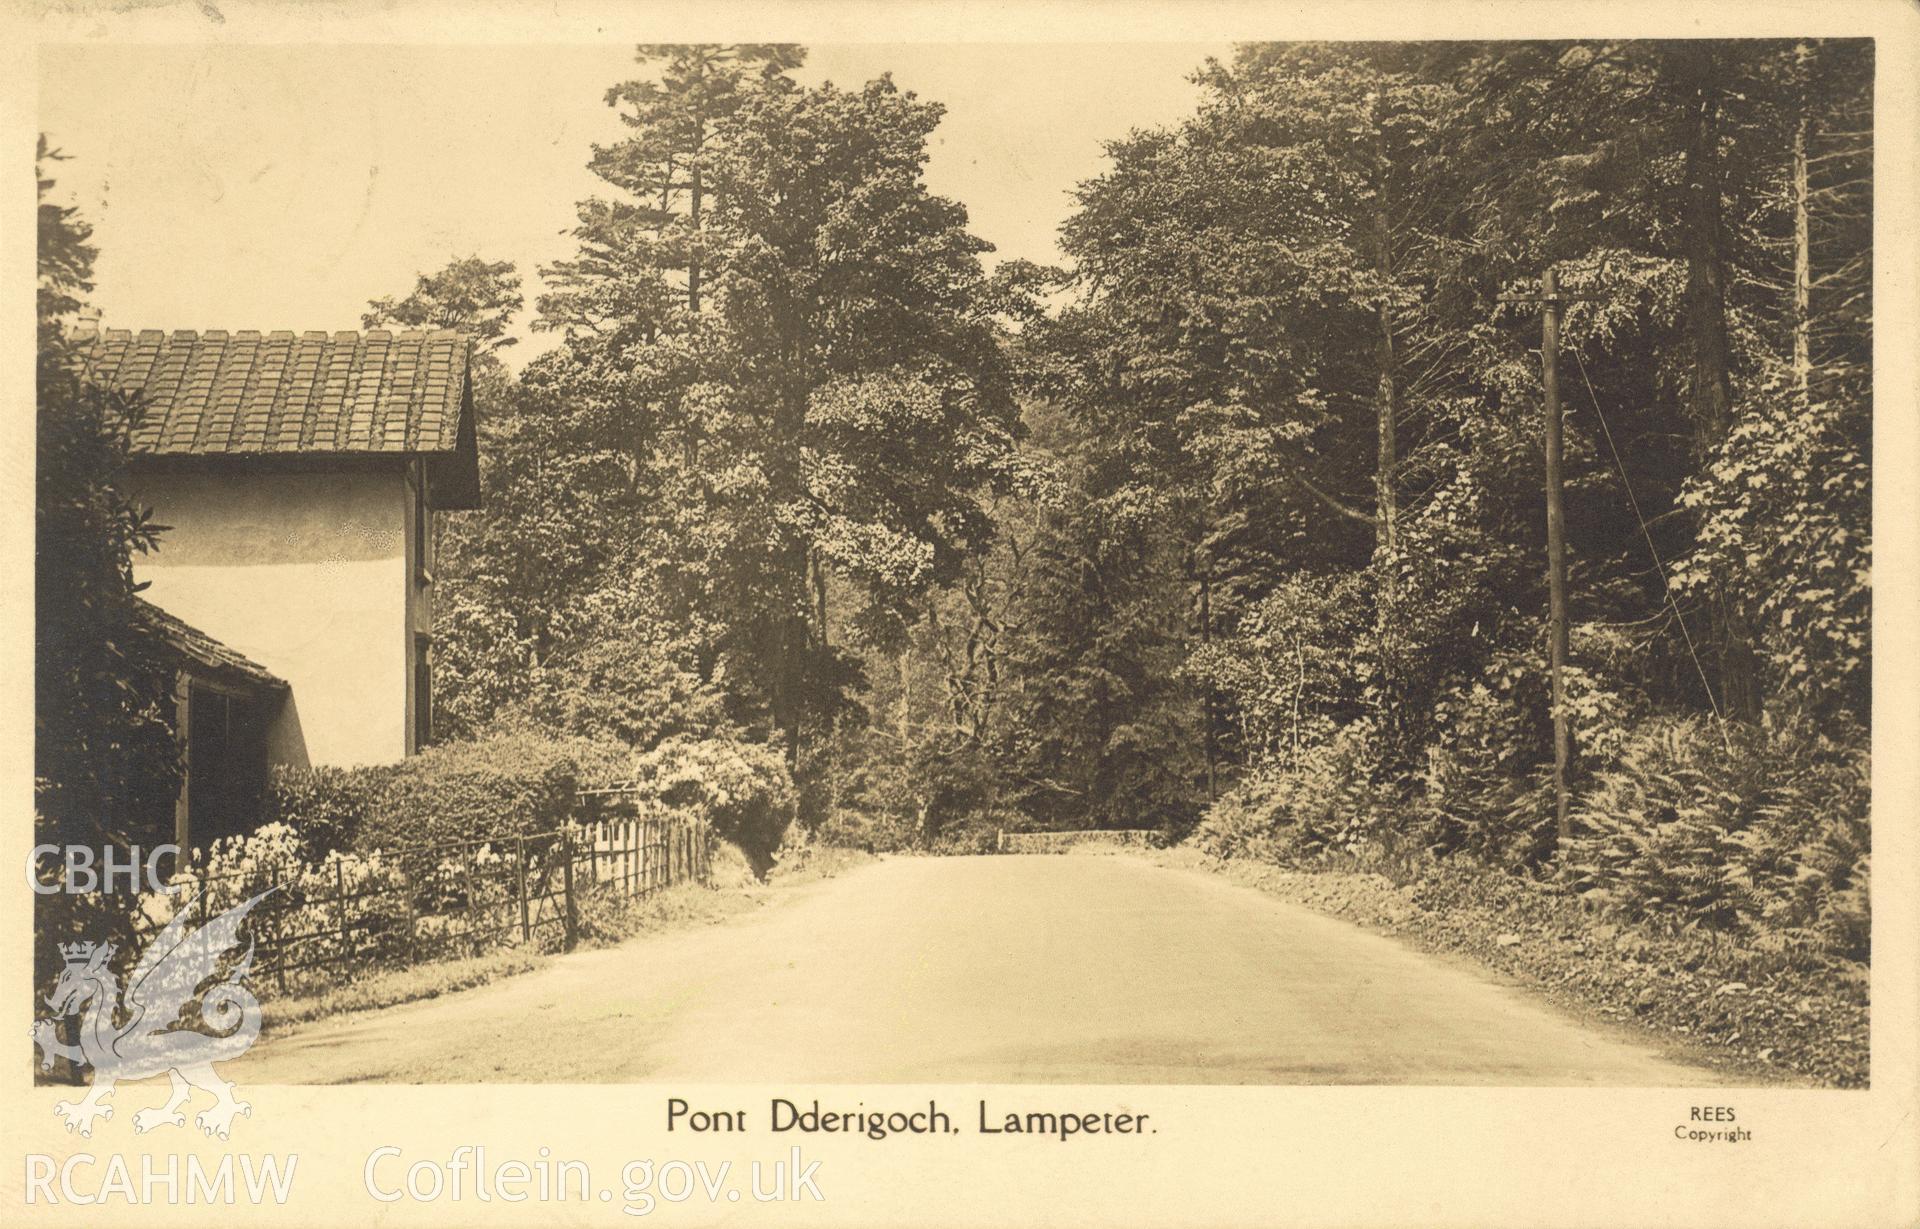 Digitised postcard image of Pont Dderigoch, near Falcondale Mansion, Lampeter, J.L. Rees, 10 Harford Square, Lampeter. Produced by Parks and Gardens Data Services, from an original item in the Peter Davis Collection at Parks and Gardens UK. We hold only web-resolution images of this collection, suitable for viewing on screen and for research purposes only. We do not hold the original images, or publication quality scans.